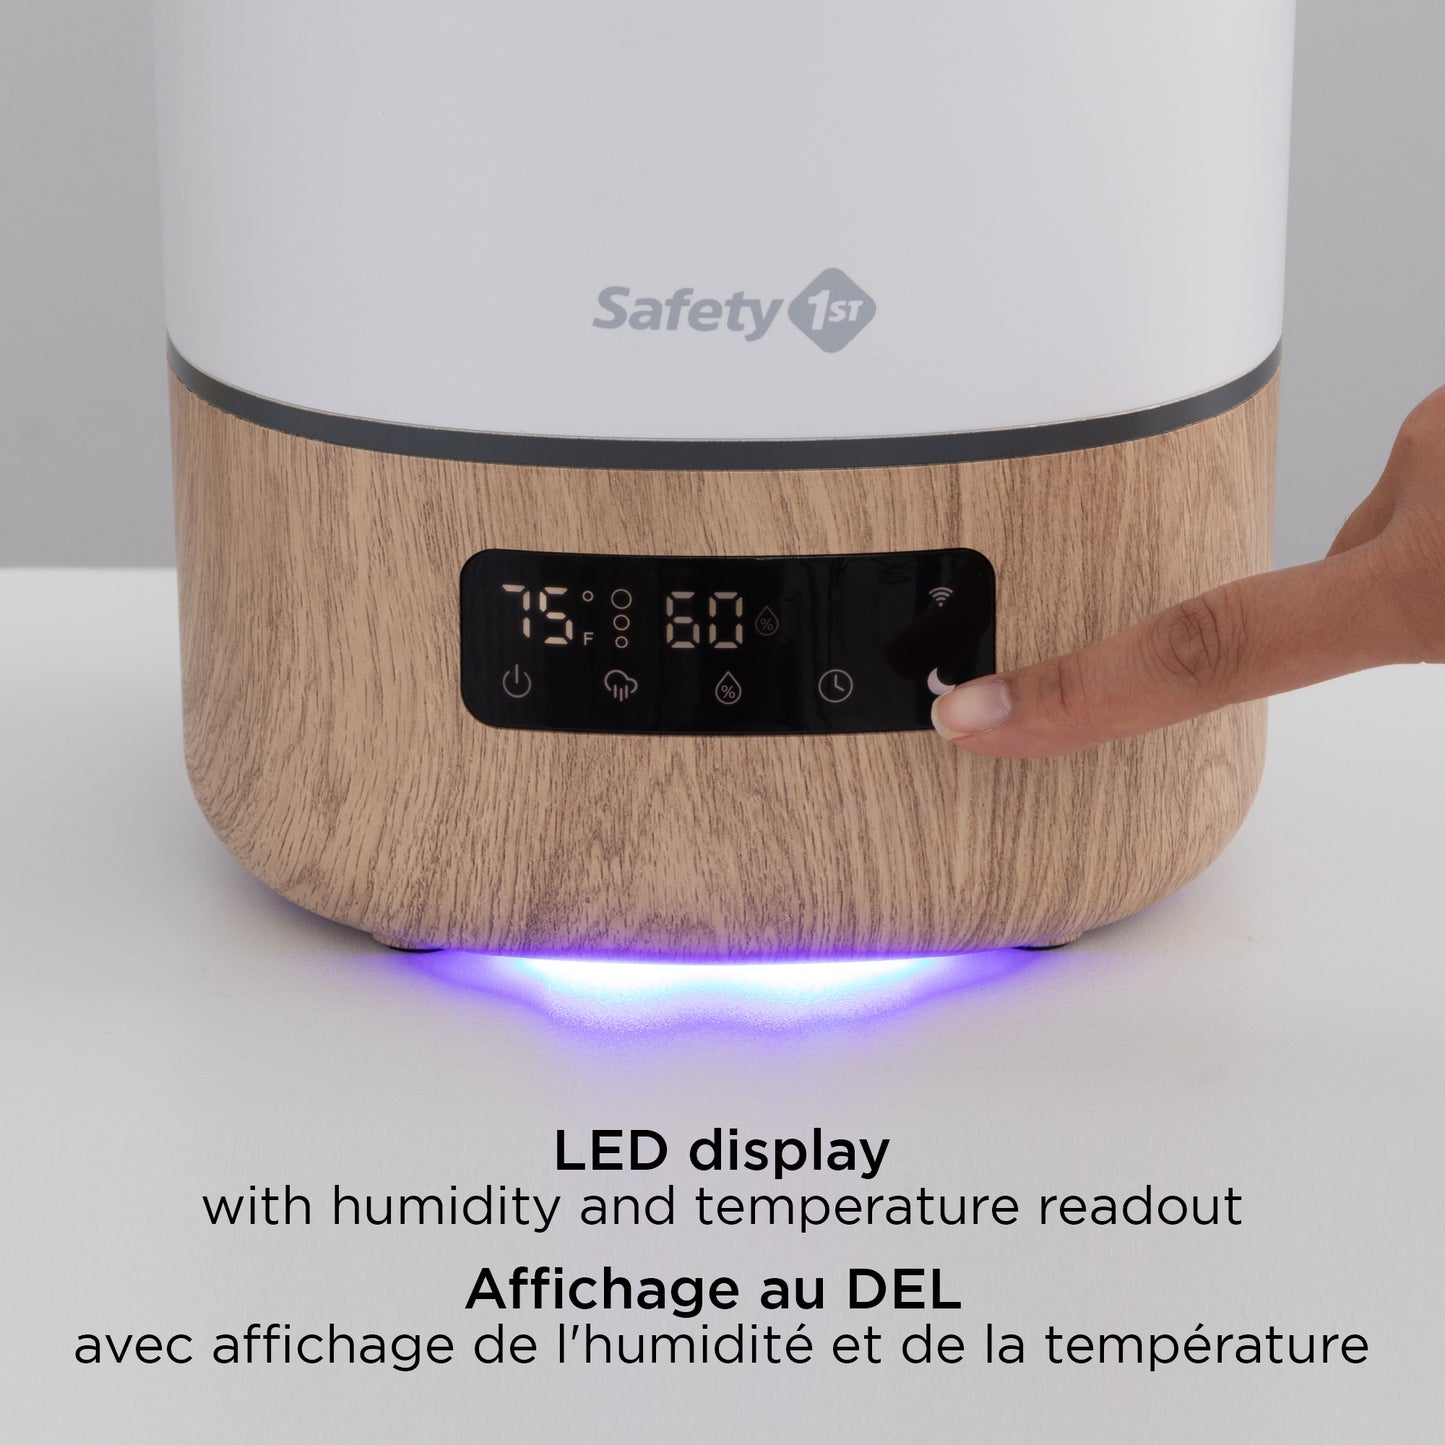 Safety 1st Humidificateur D'air Intelligent